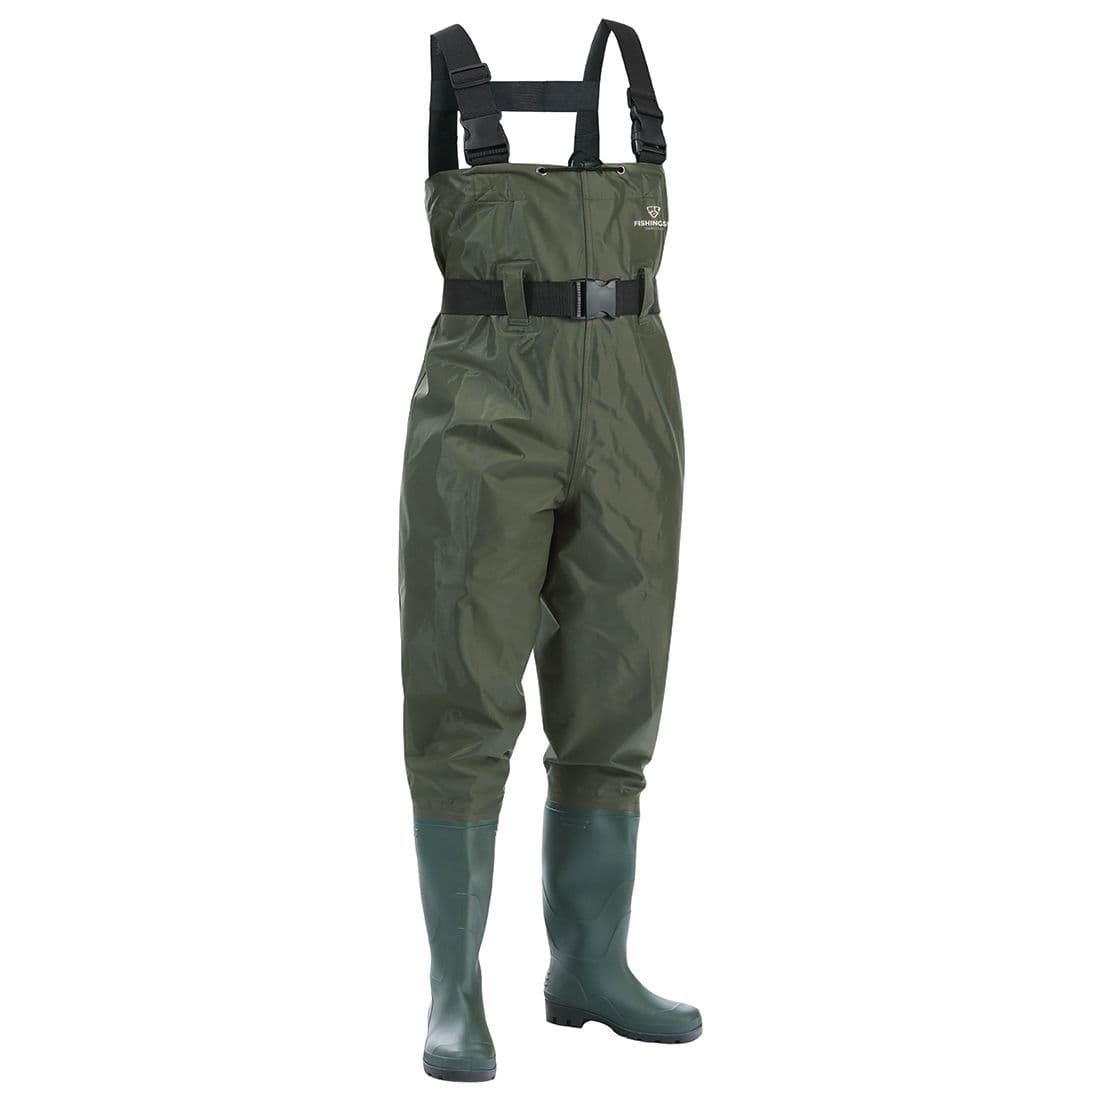 Kids Chest Waders Youth Fishing Waders for Toddler Children